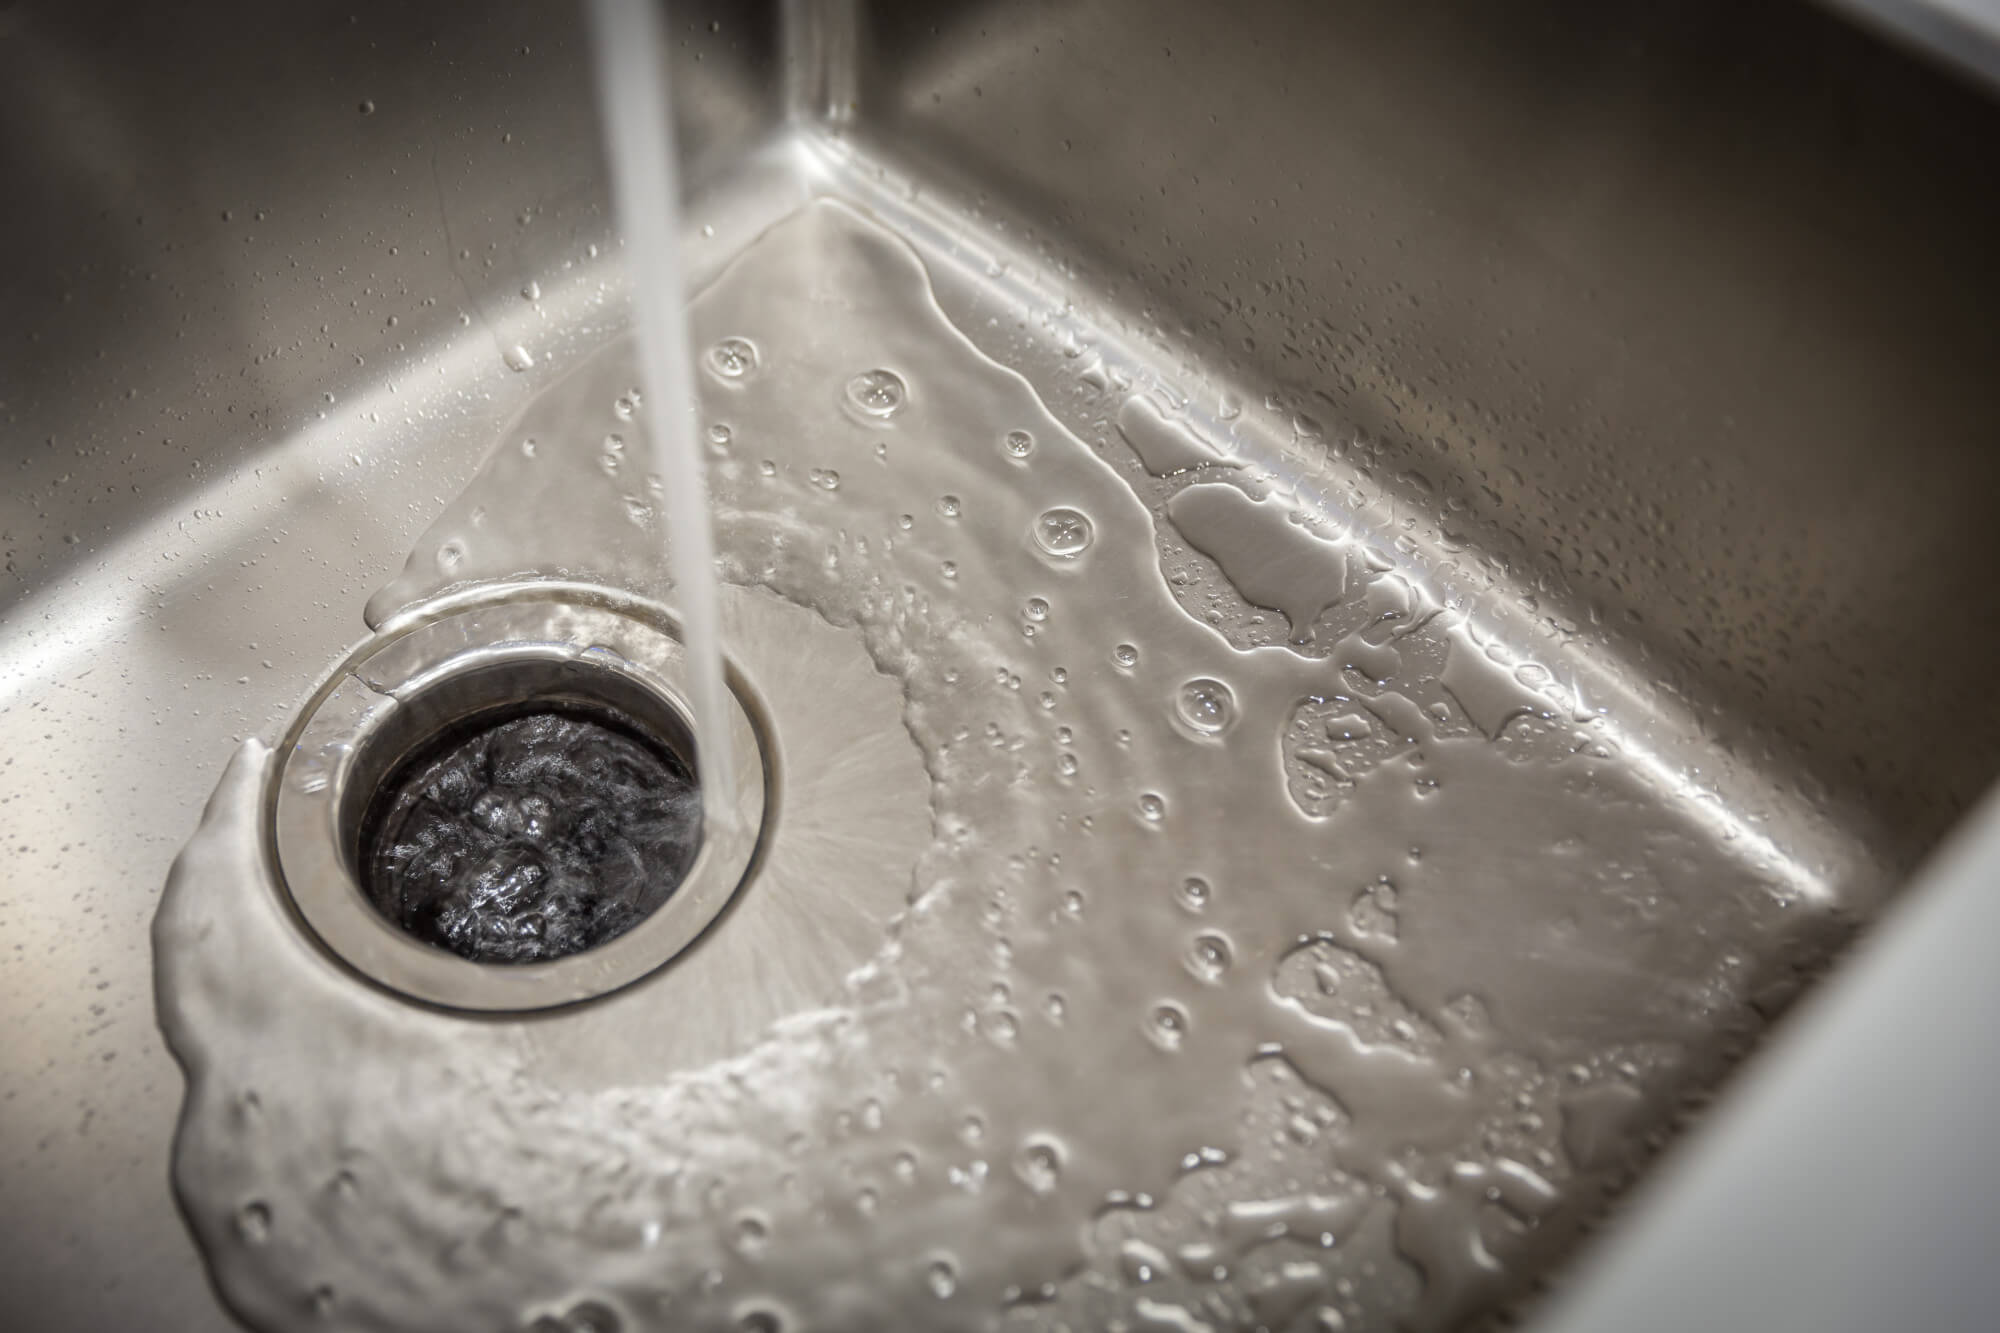 Hanover Supply, do garbage disposals cause plumbing problems